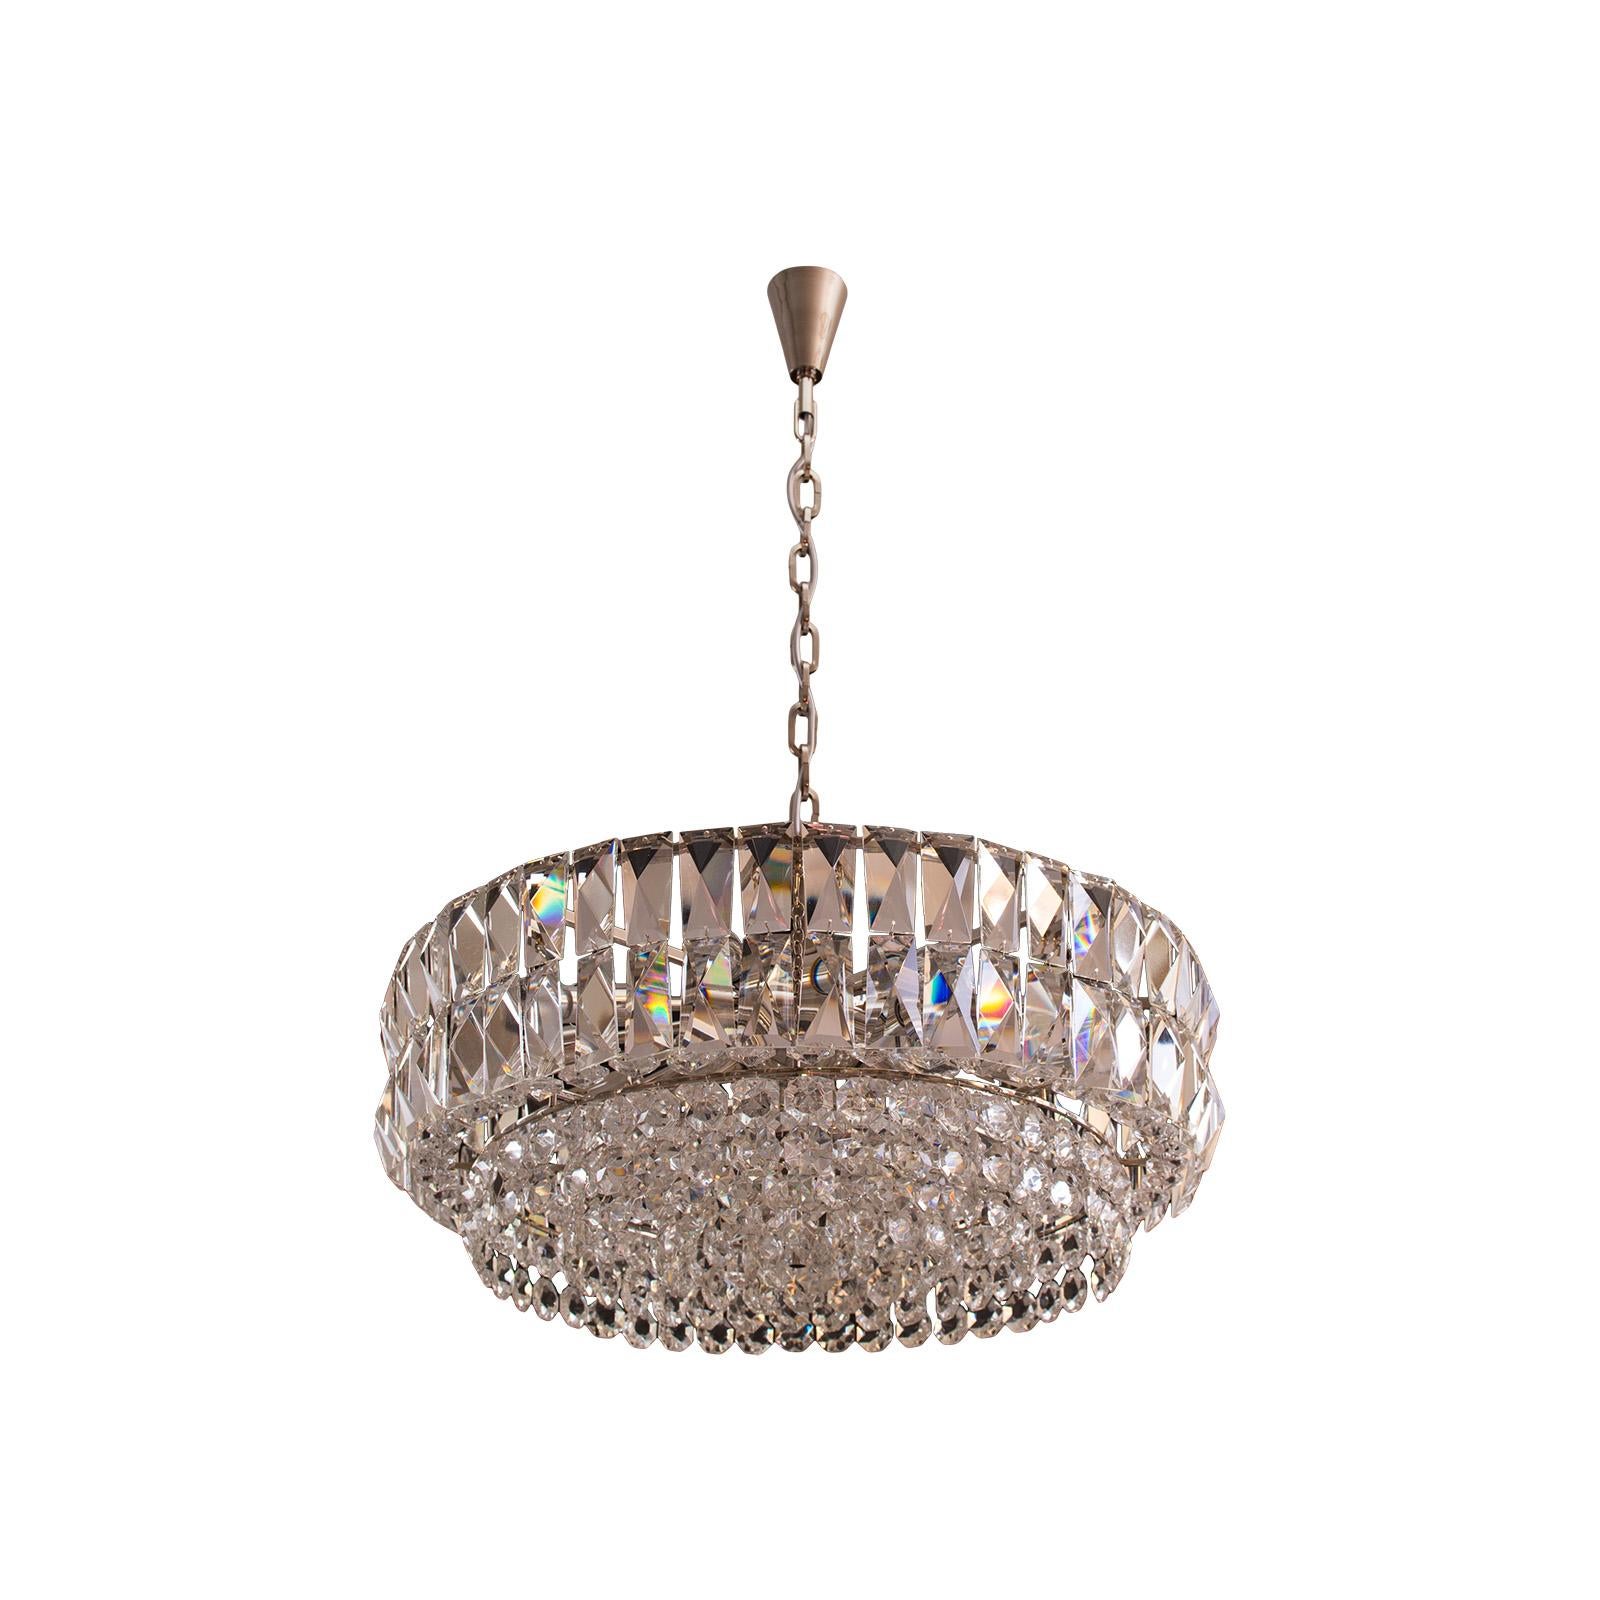 A beautiful crystal chandelier with hand-cut glass-stones in very good quality

Suitable for the US market